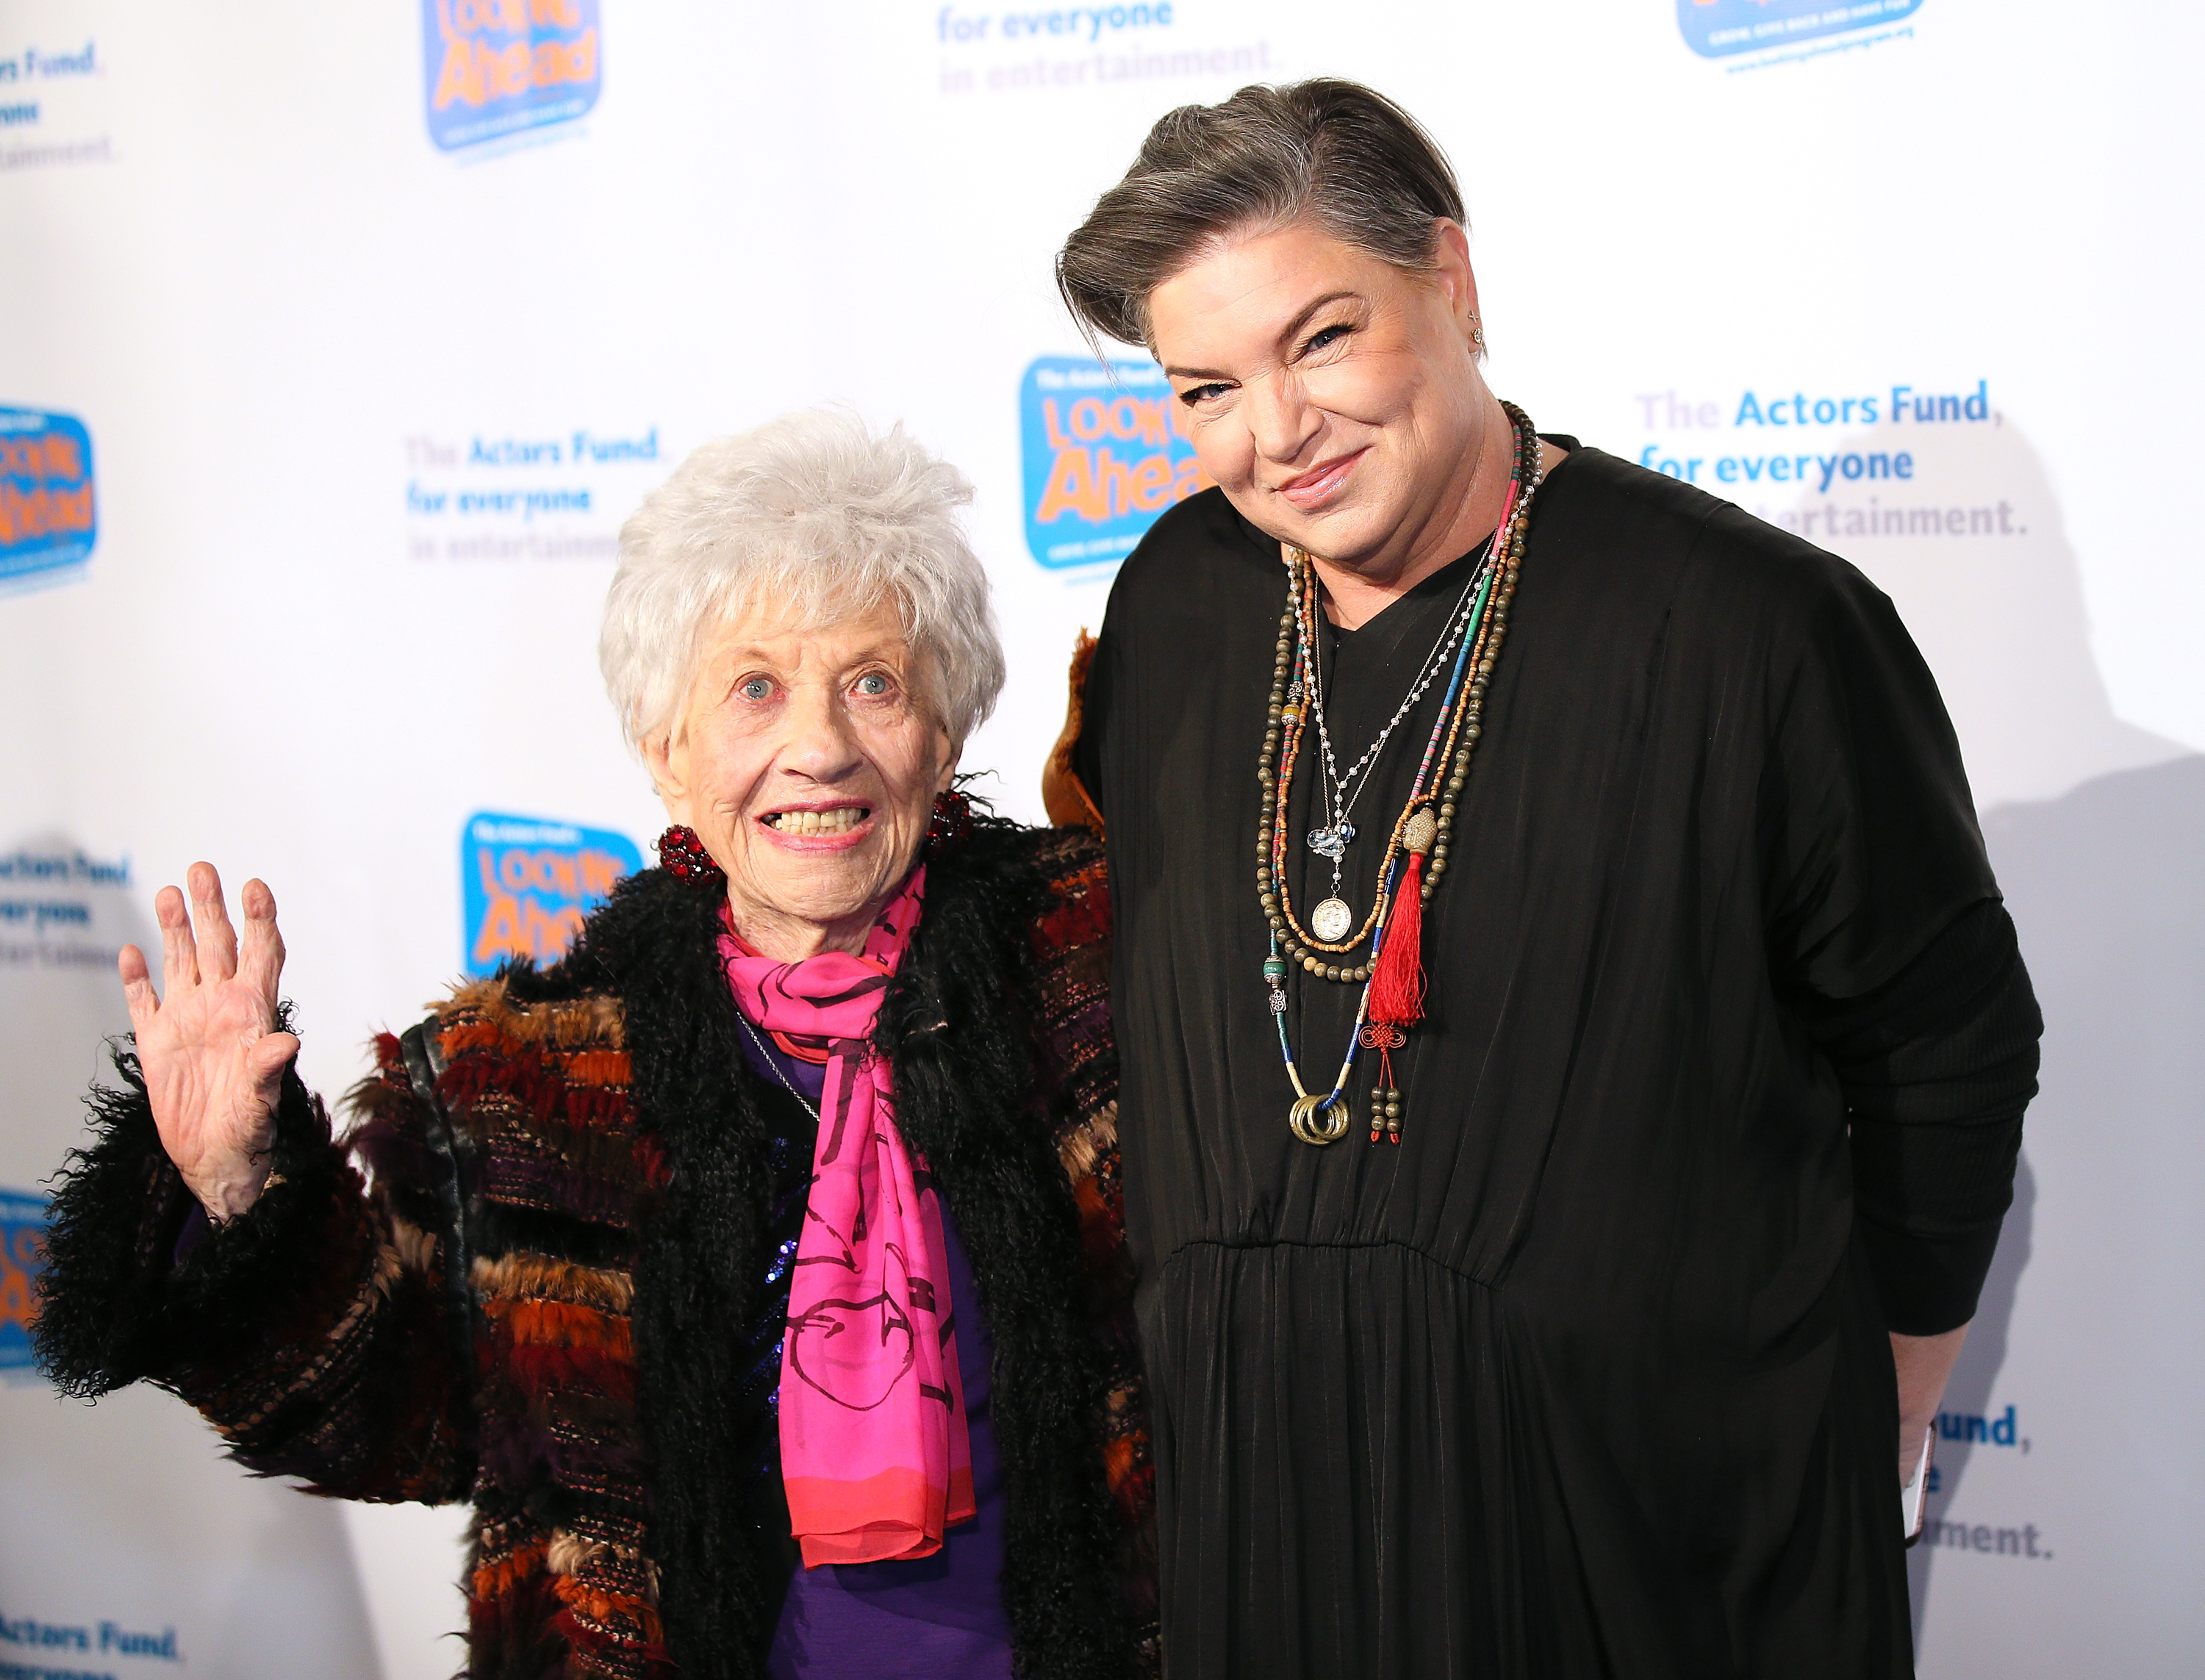 Charlotte Rae and Mindy Cohn at the Actors Fund's 2017 Looking Ahead Awards honoring the youth cast of NBC's "This Is Us" at Taglyan Complex on December 5, 2017 in Los Angeles, California | Source: Getty Images